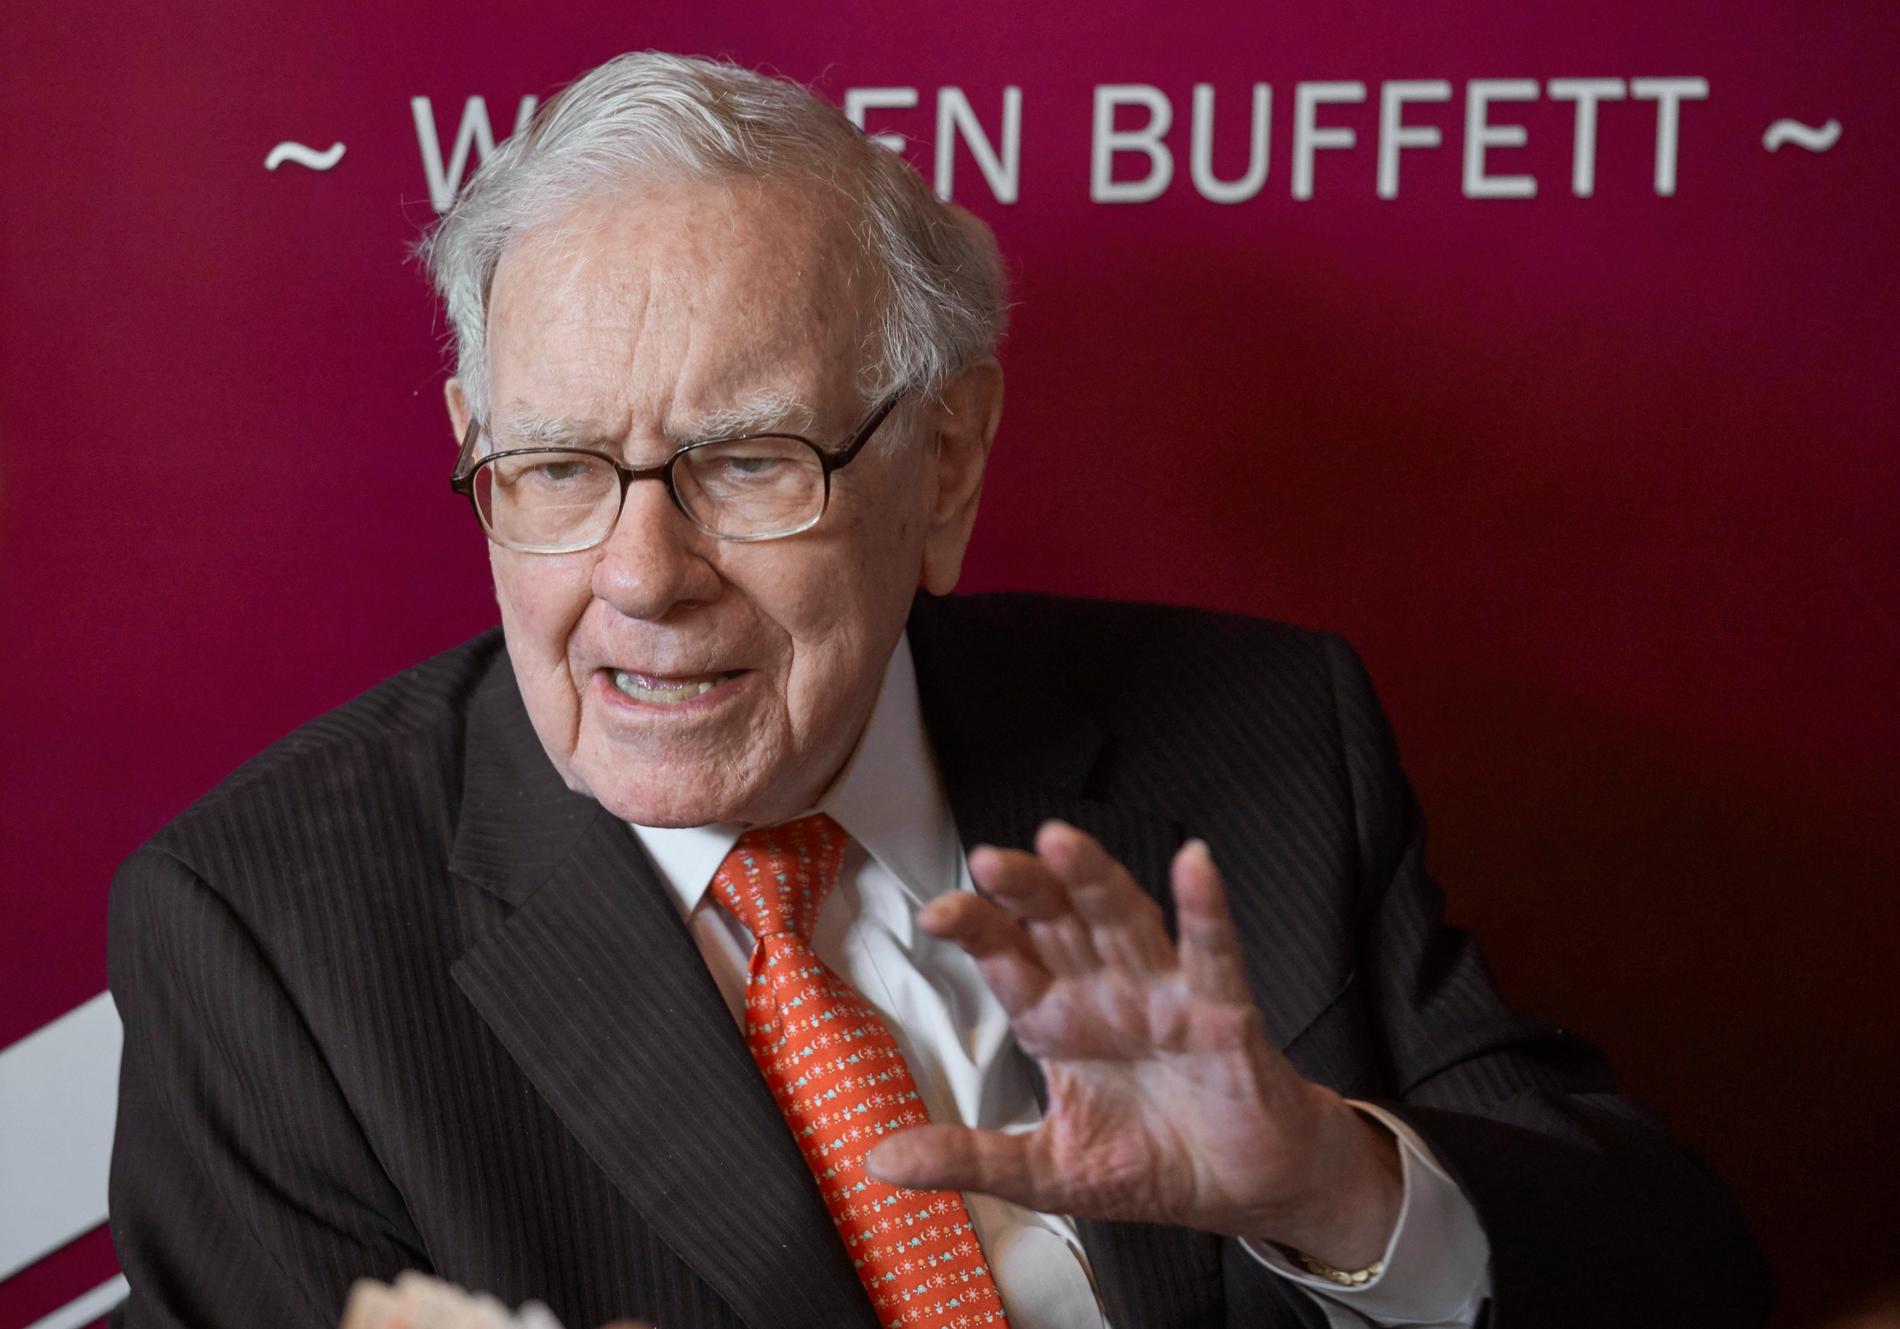 Berkshire Hathaway Reports Jump in Profit in Second Quarter